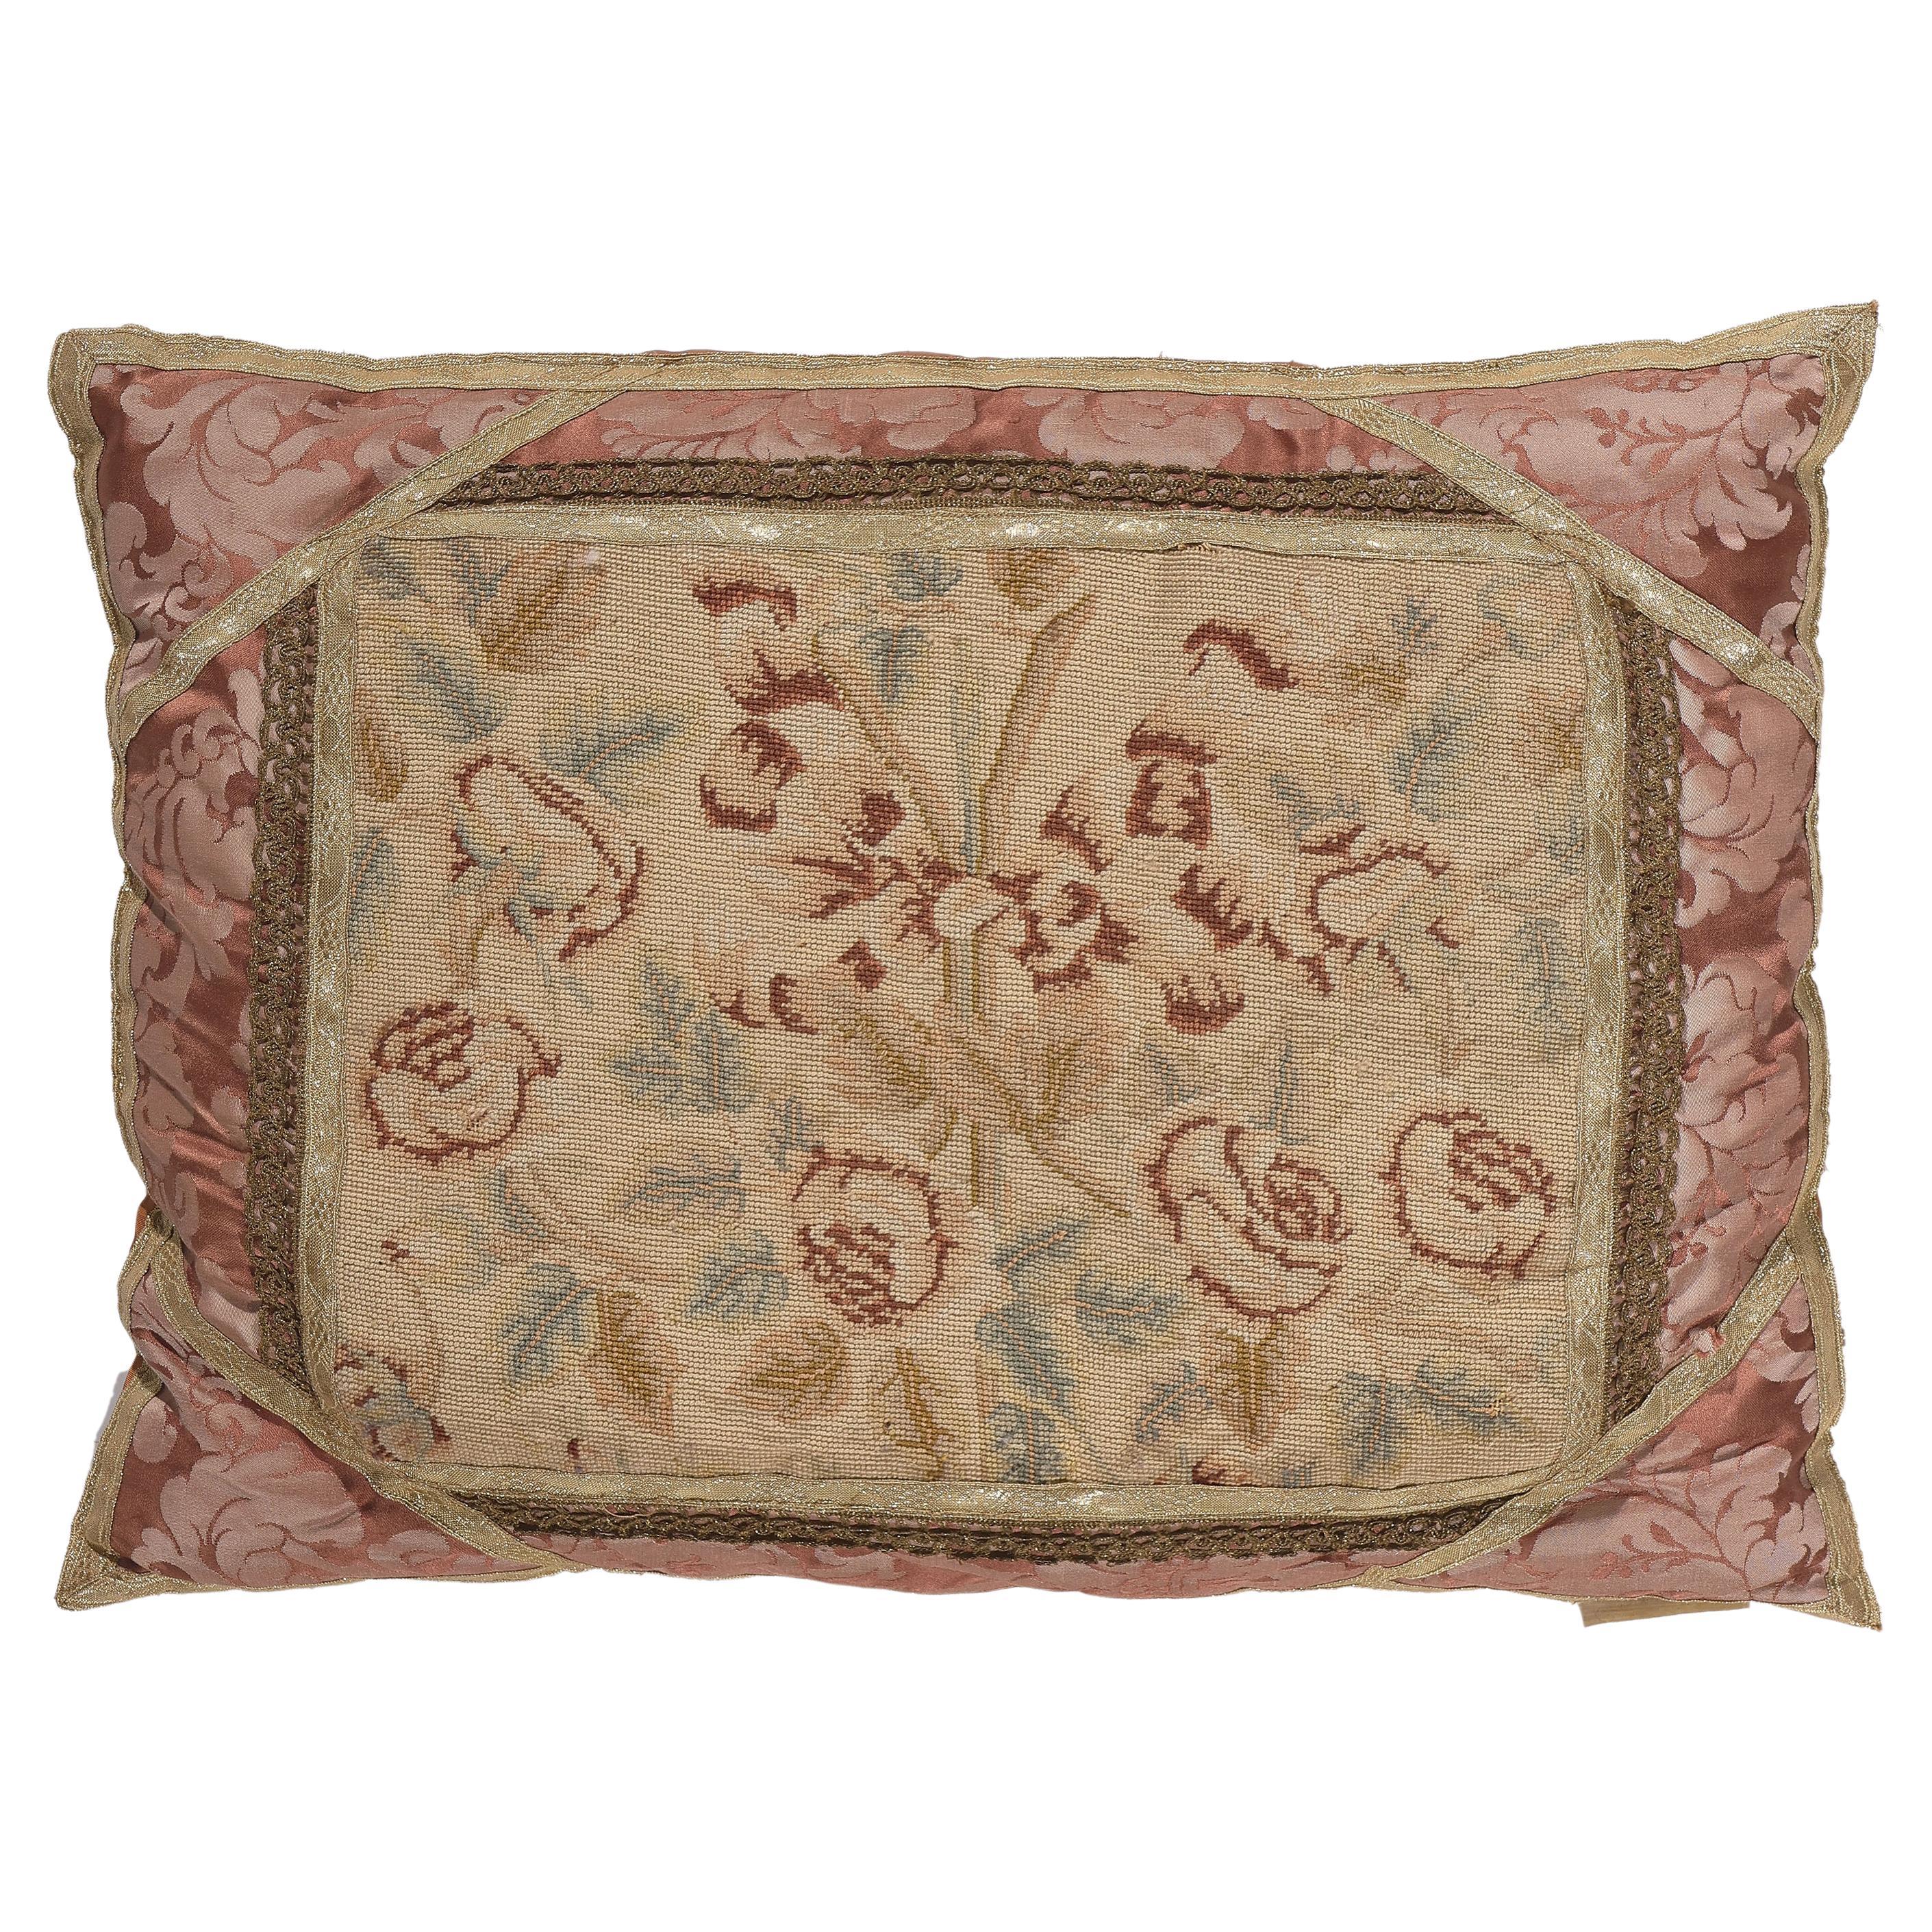 Antique French Aubusson Pillow with Needlepoint Tapestry